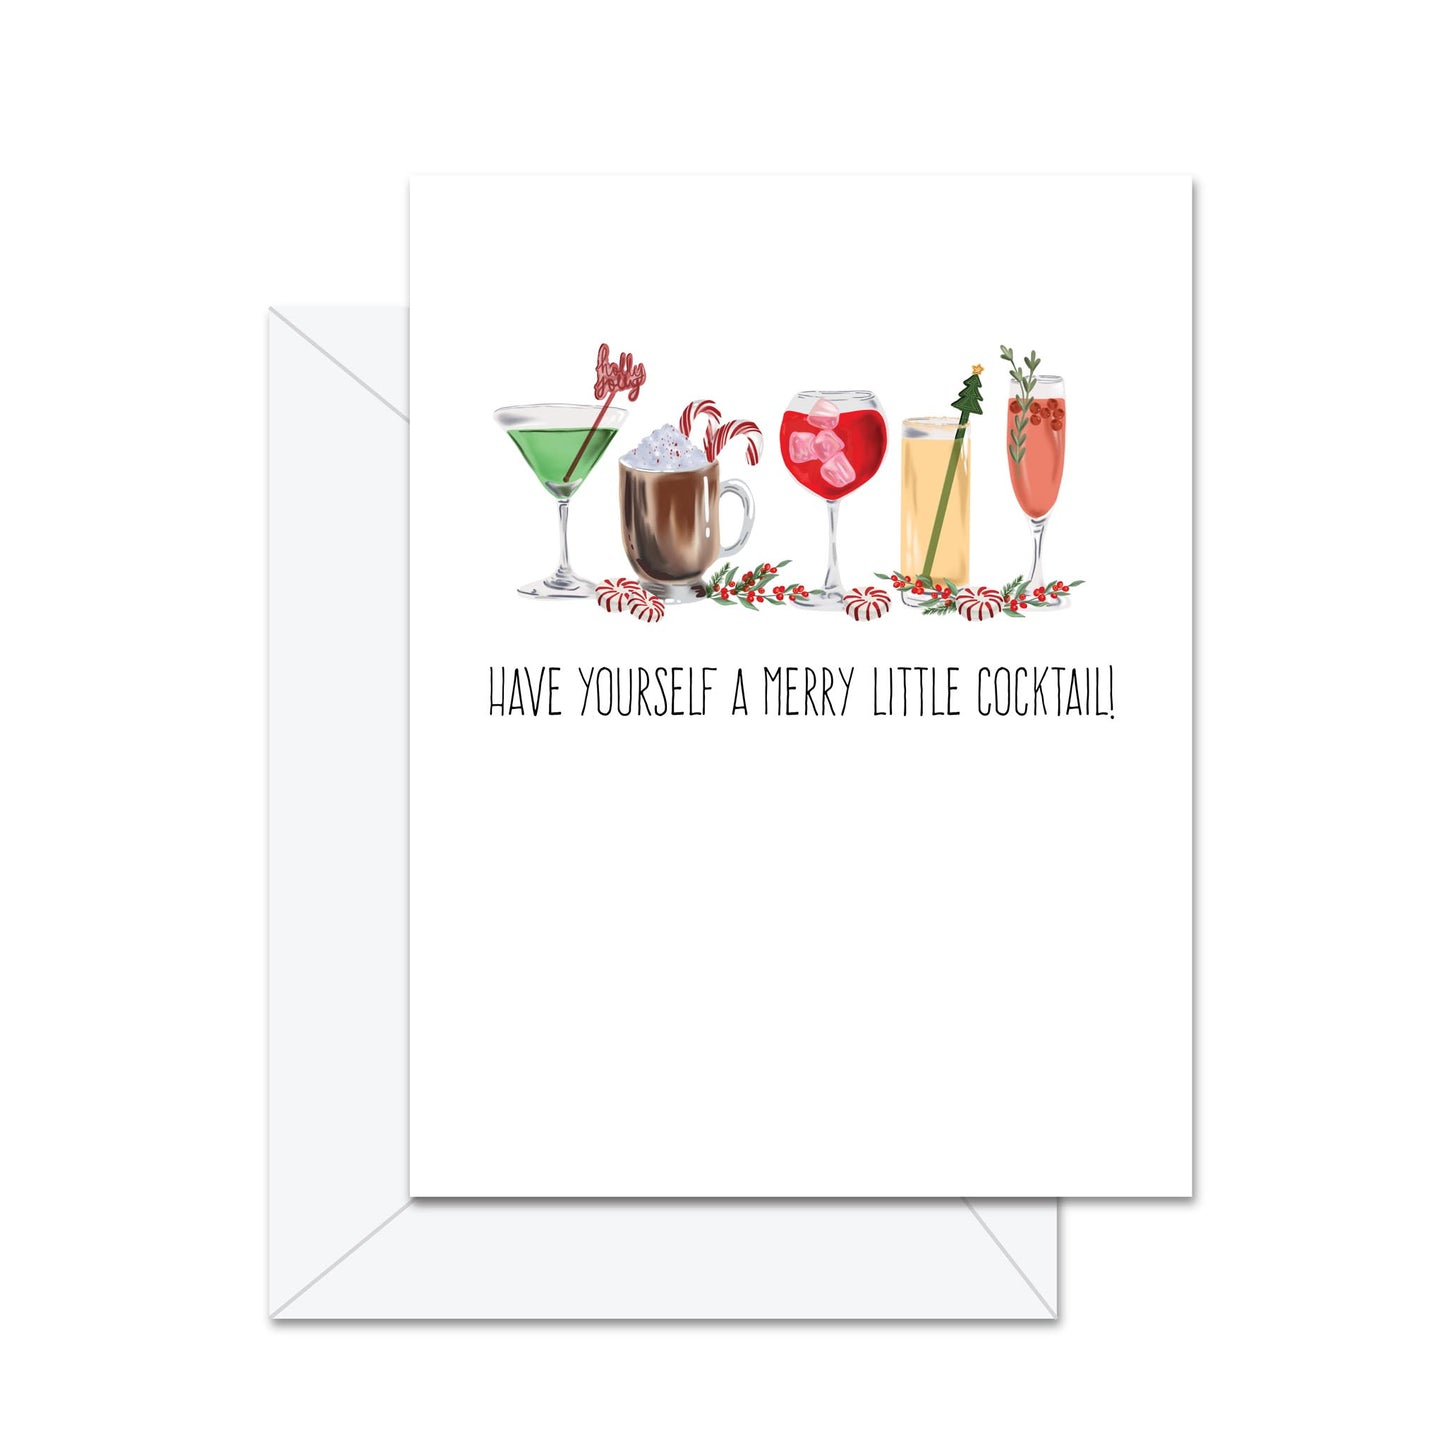 Have Yourself A Merry Little Cocktail! - Greeting Card